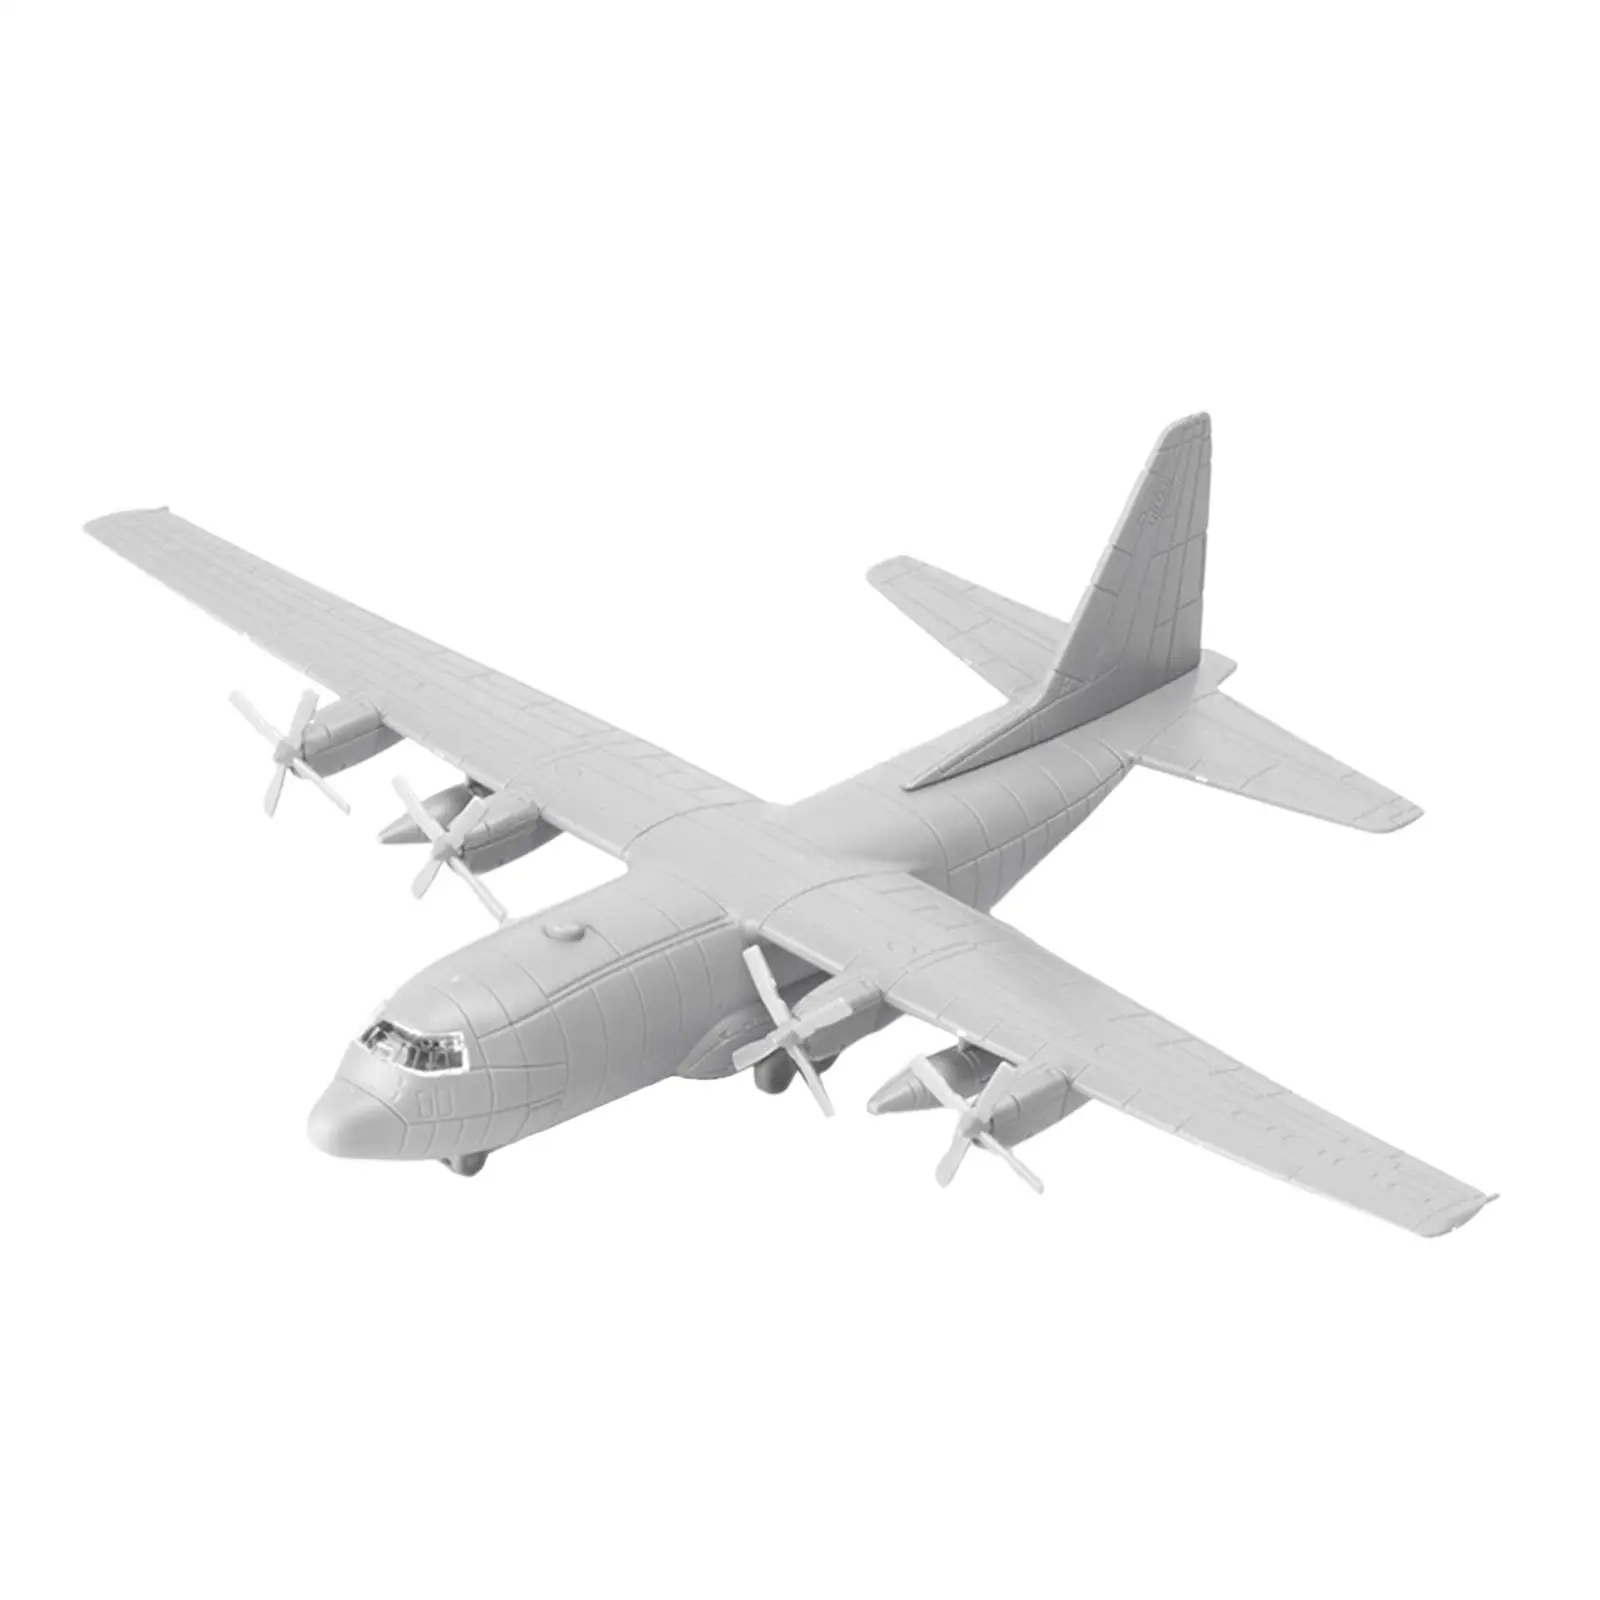 Plane Model Collectables Gifts for Living Room Housewarming Gifts Collection